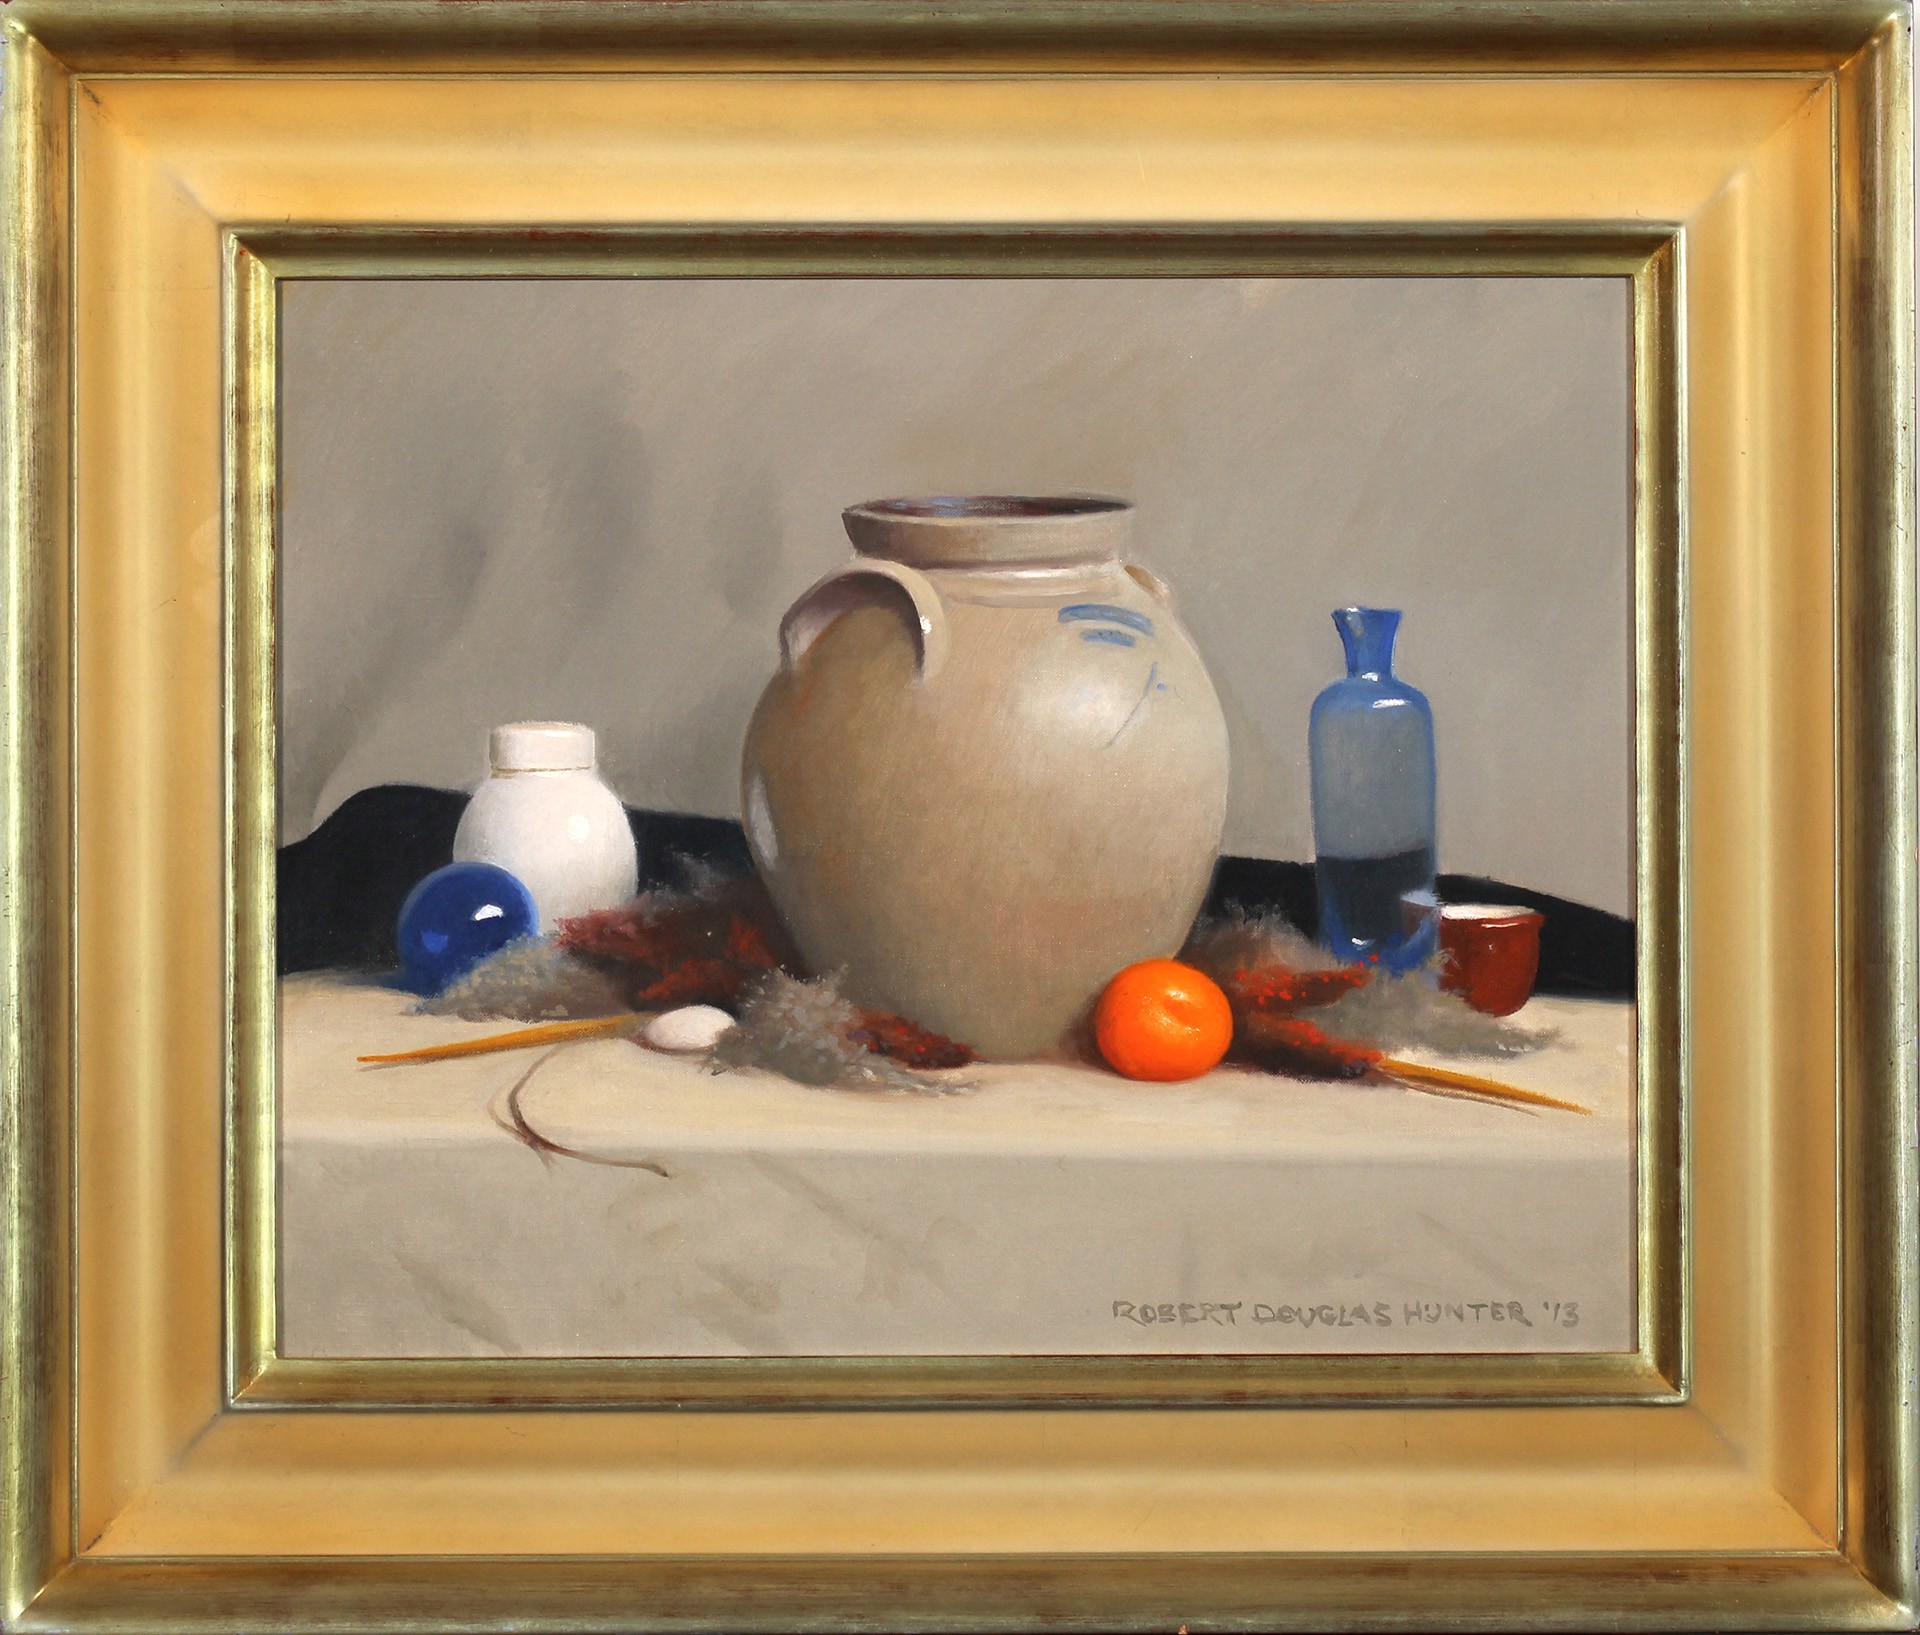 Still Life with a Clementine by Robert Douglas Hunter